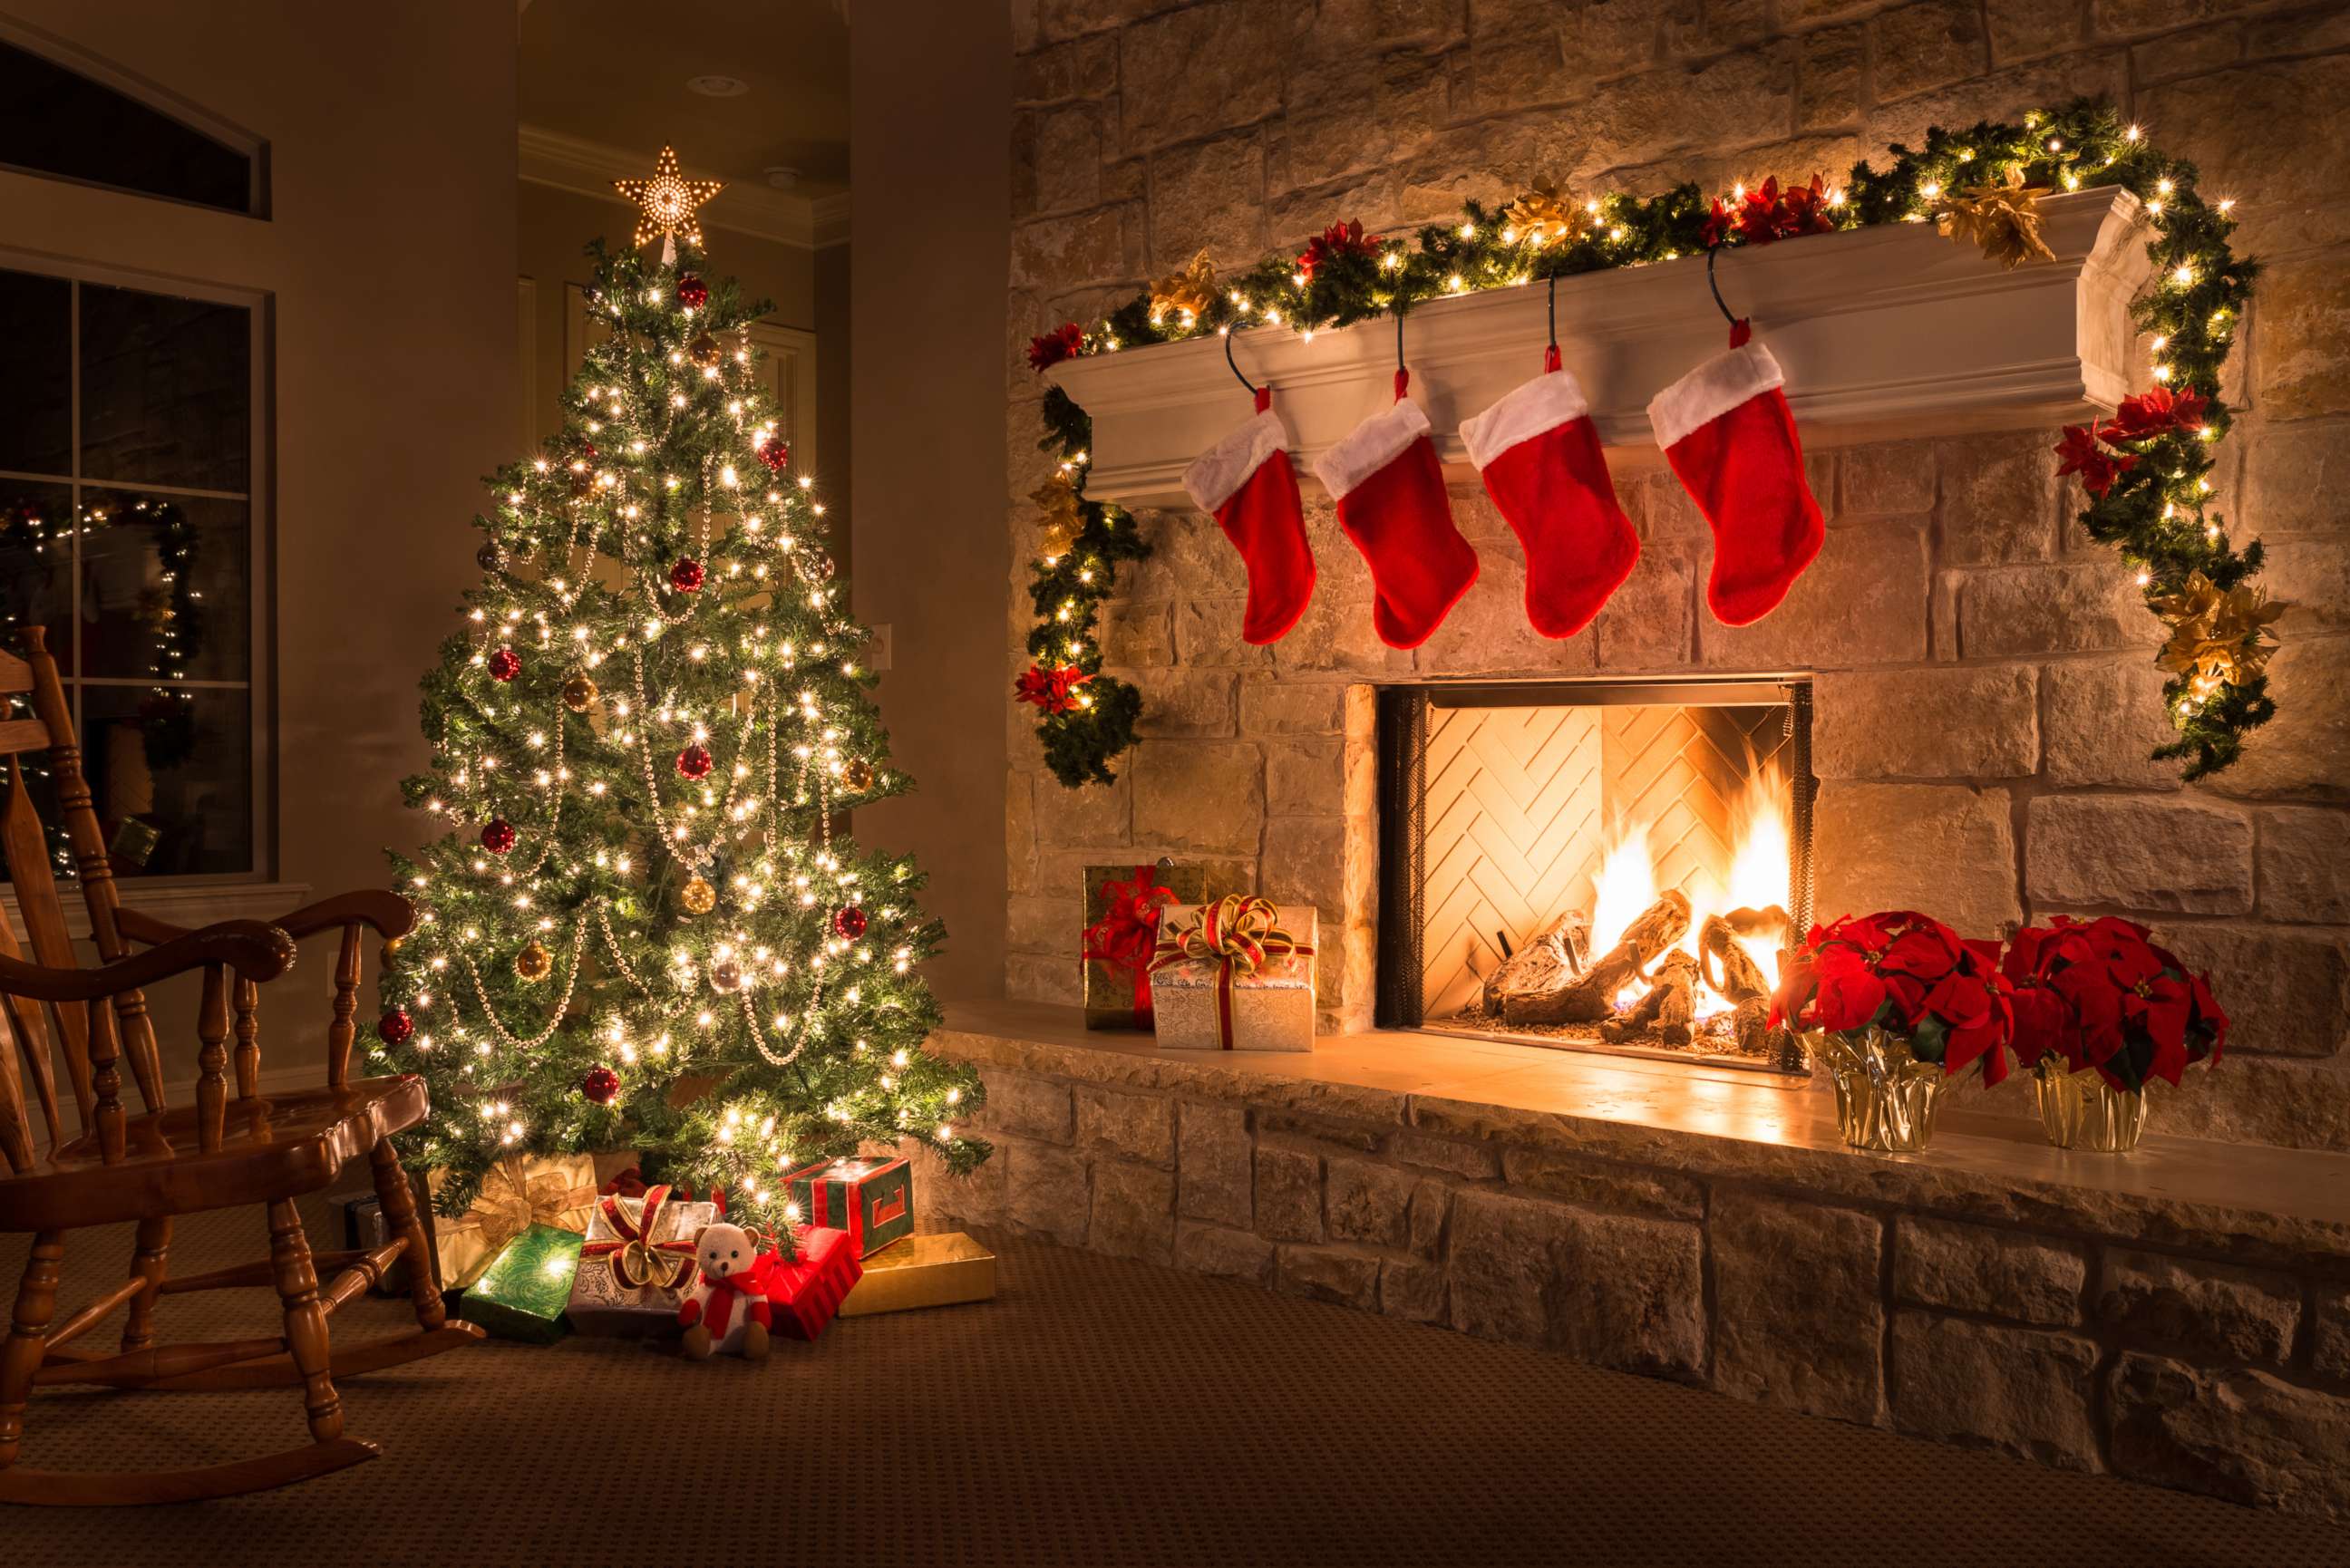 PHOTO: A Christmas tree and stockings hang from the mantel of a fireplace are pictured in this undated stock photo.